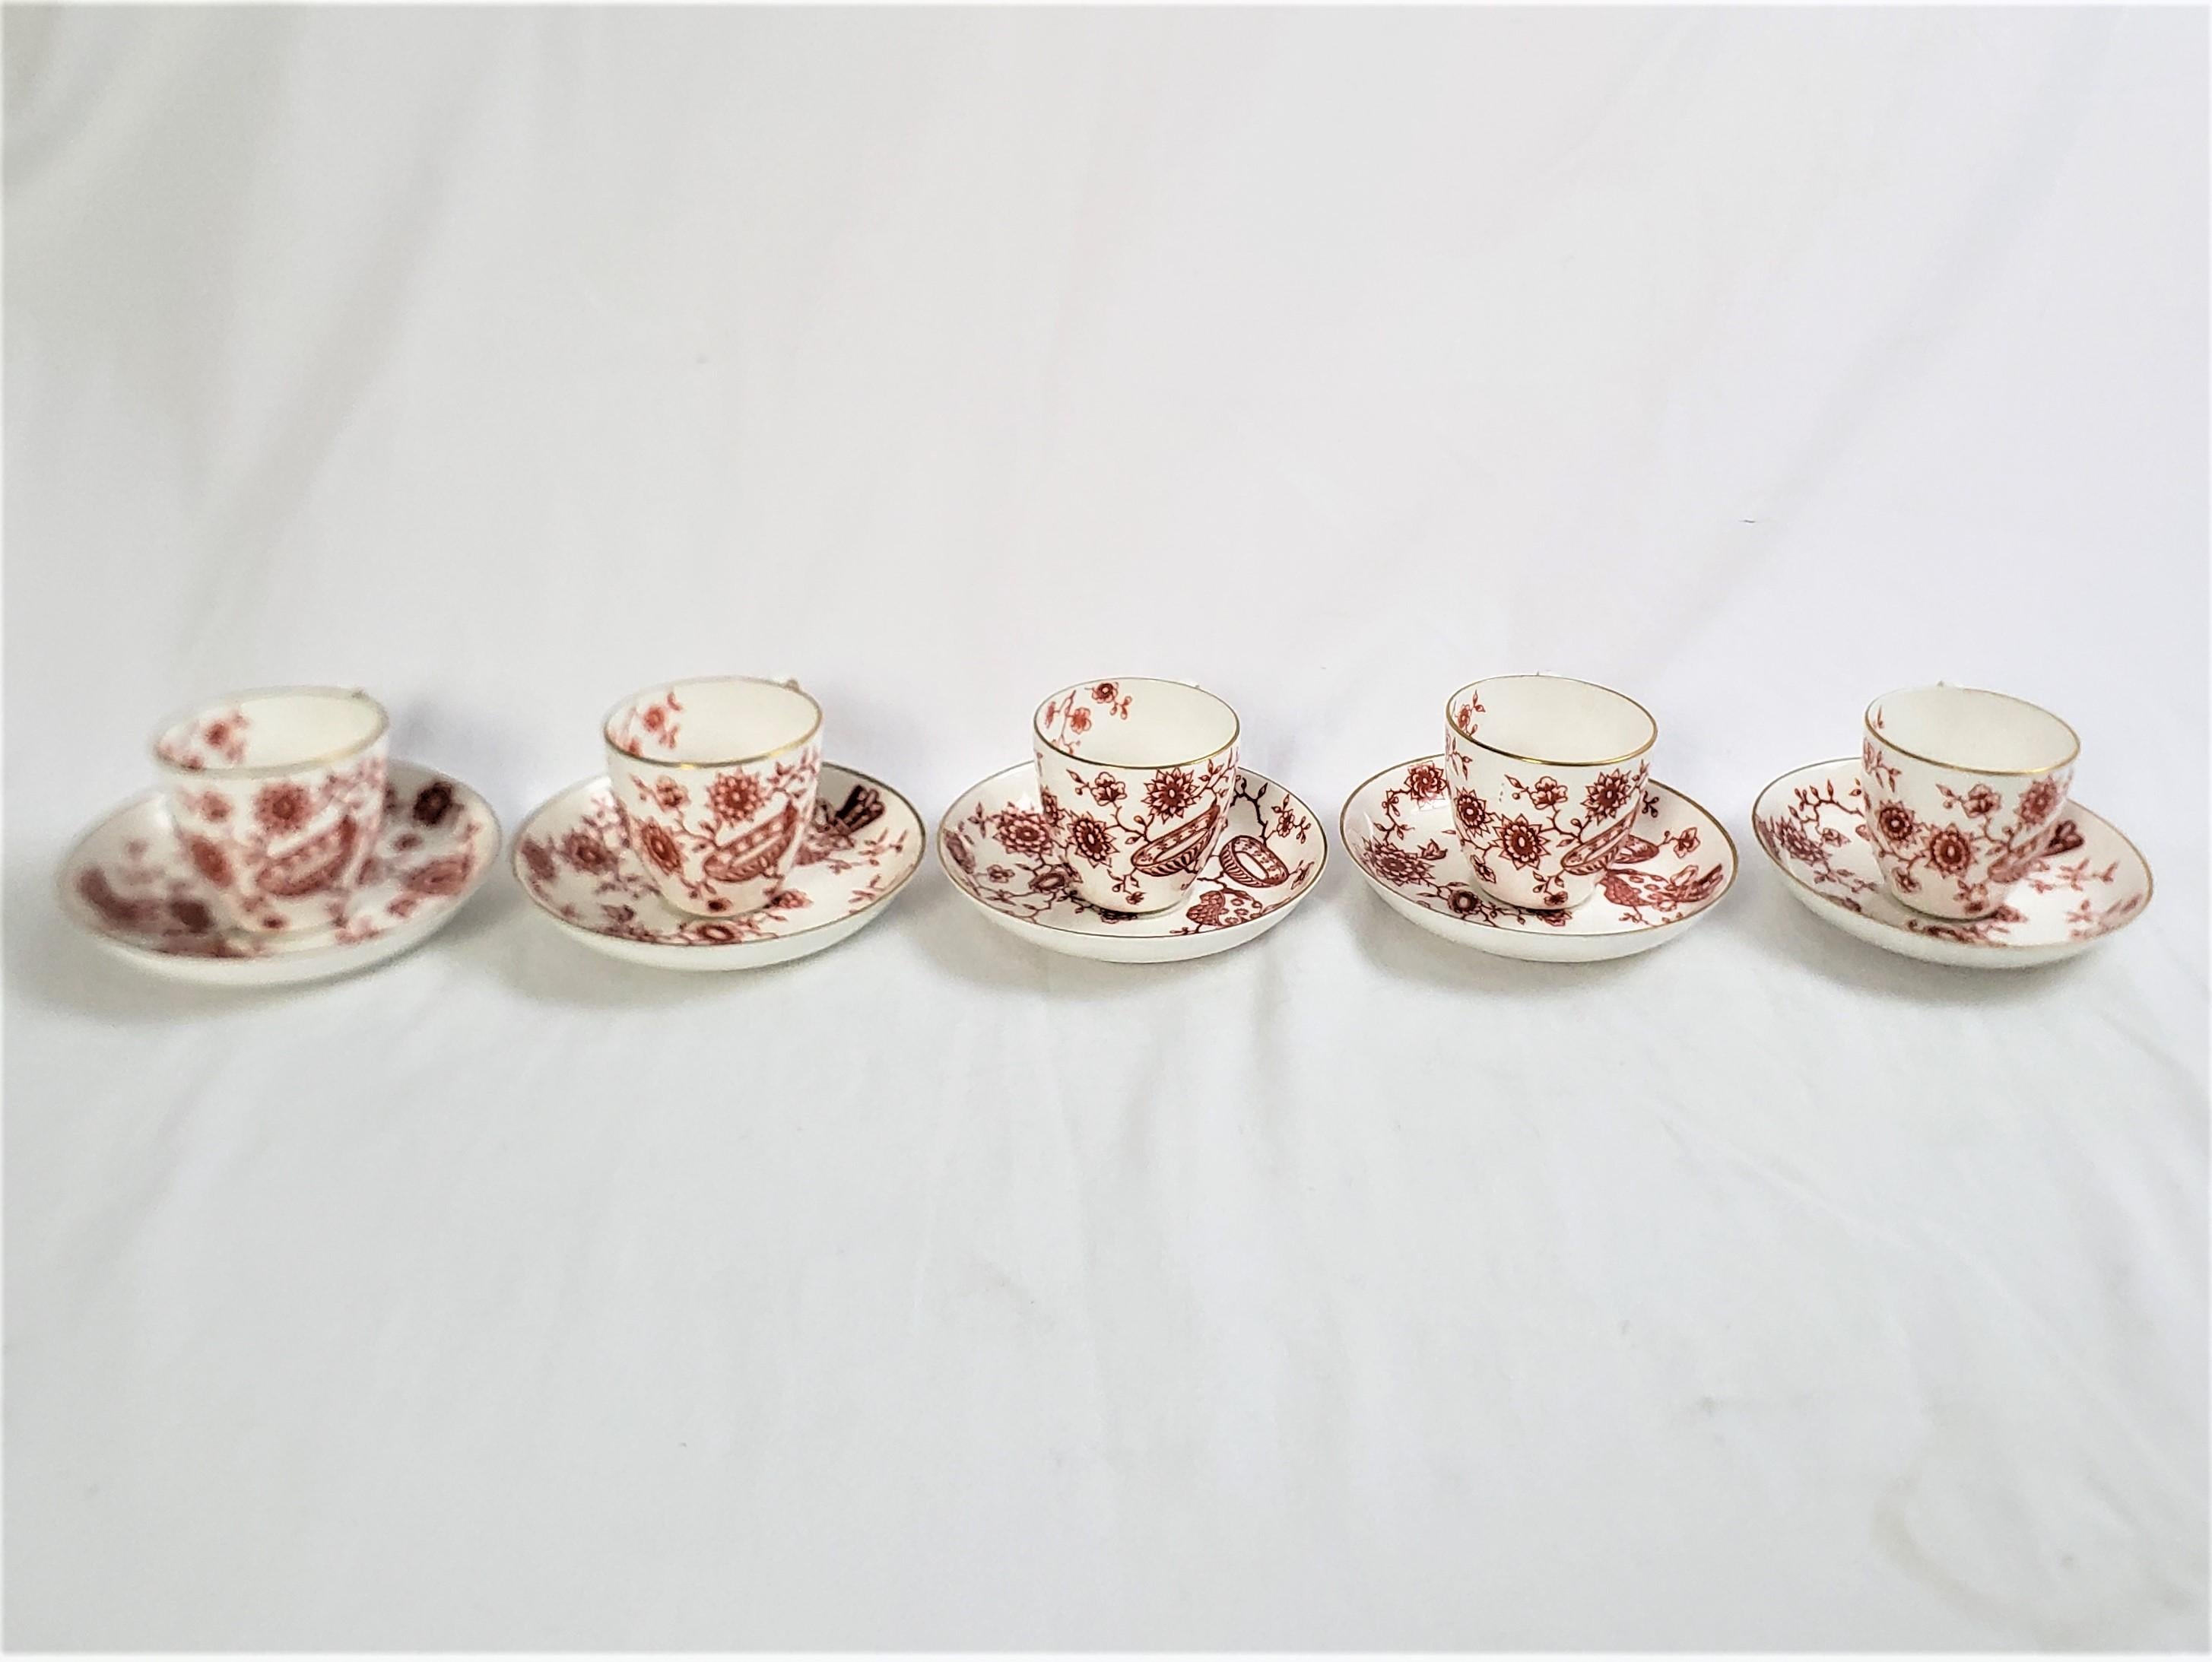 Antique Royal Crown Derby Chinoiserie Styled Five Small Cup & Saucer Sets In Good Condition For Sale In Hamilton, Ontario